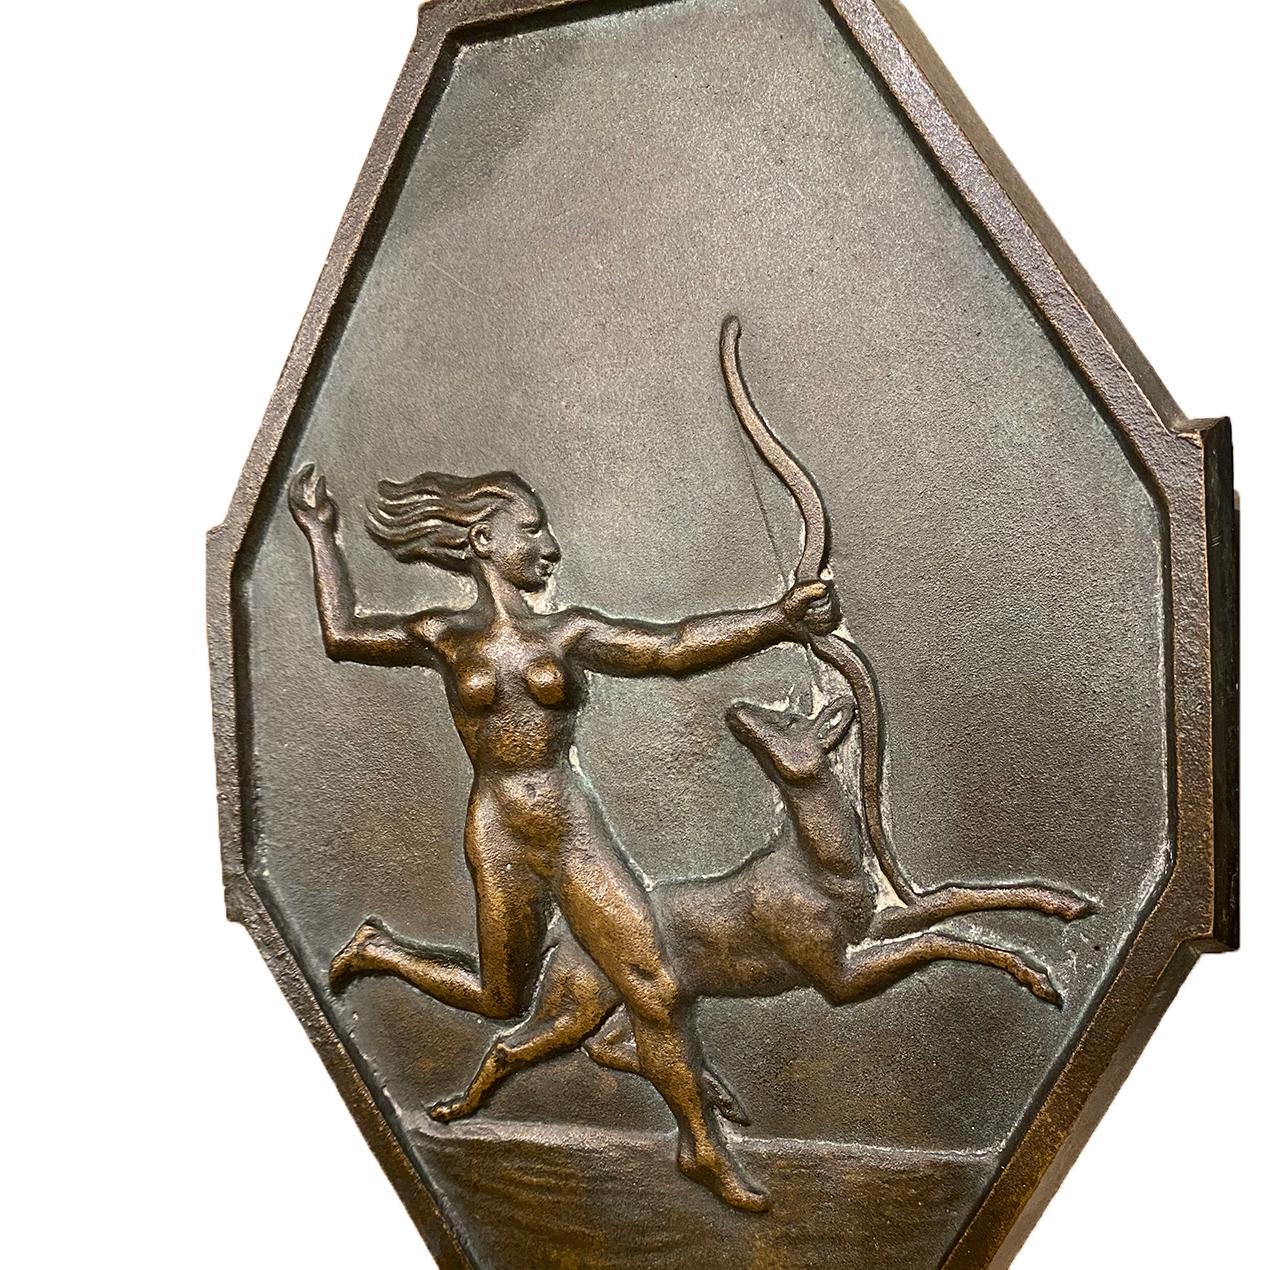 Pair of circa 1930's single-light French patinated bronze sconces depicting Diana hunting.

Measurements:
Height: 10.5